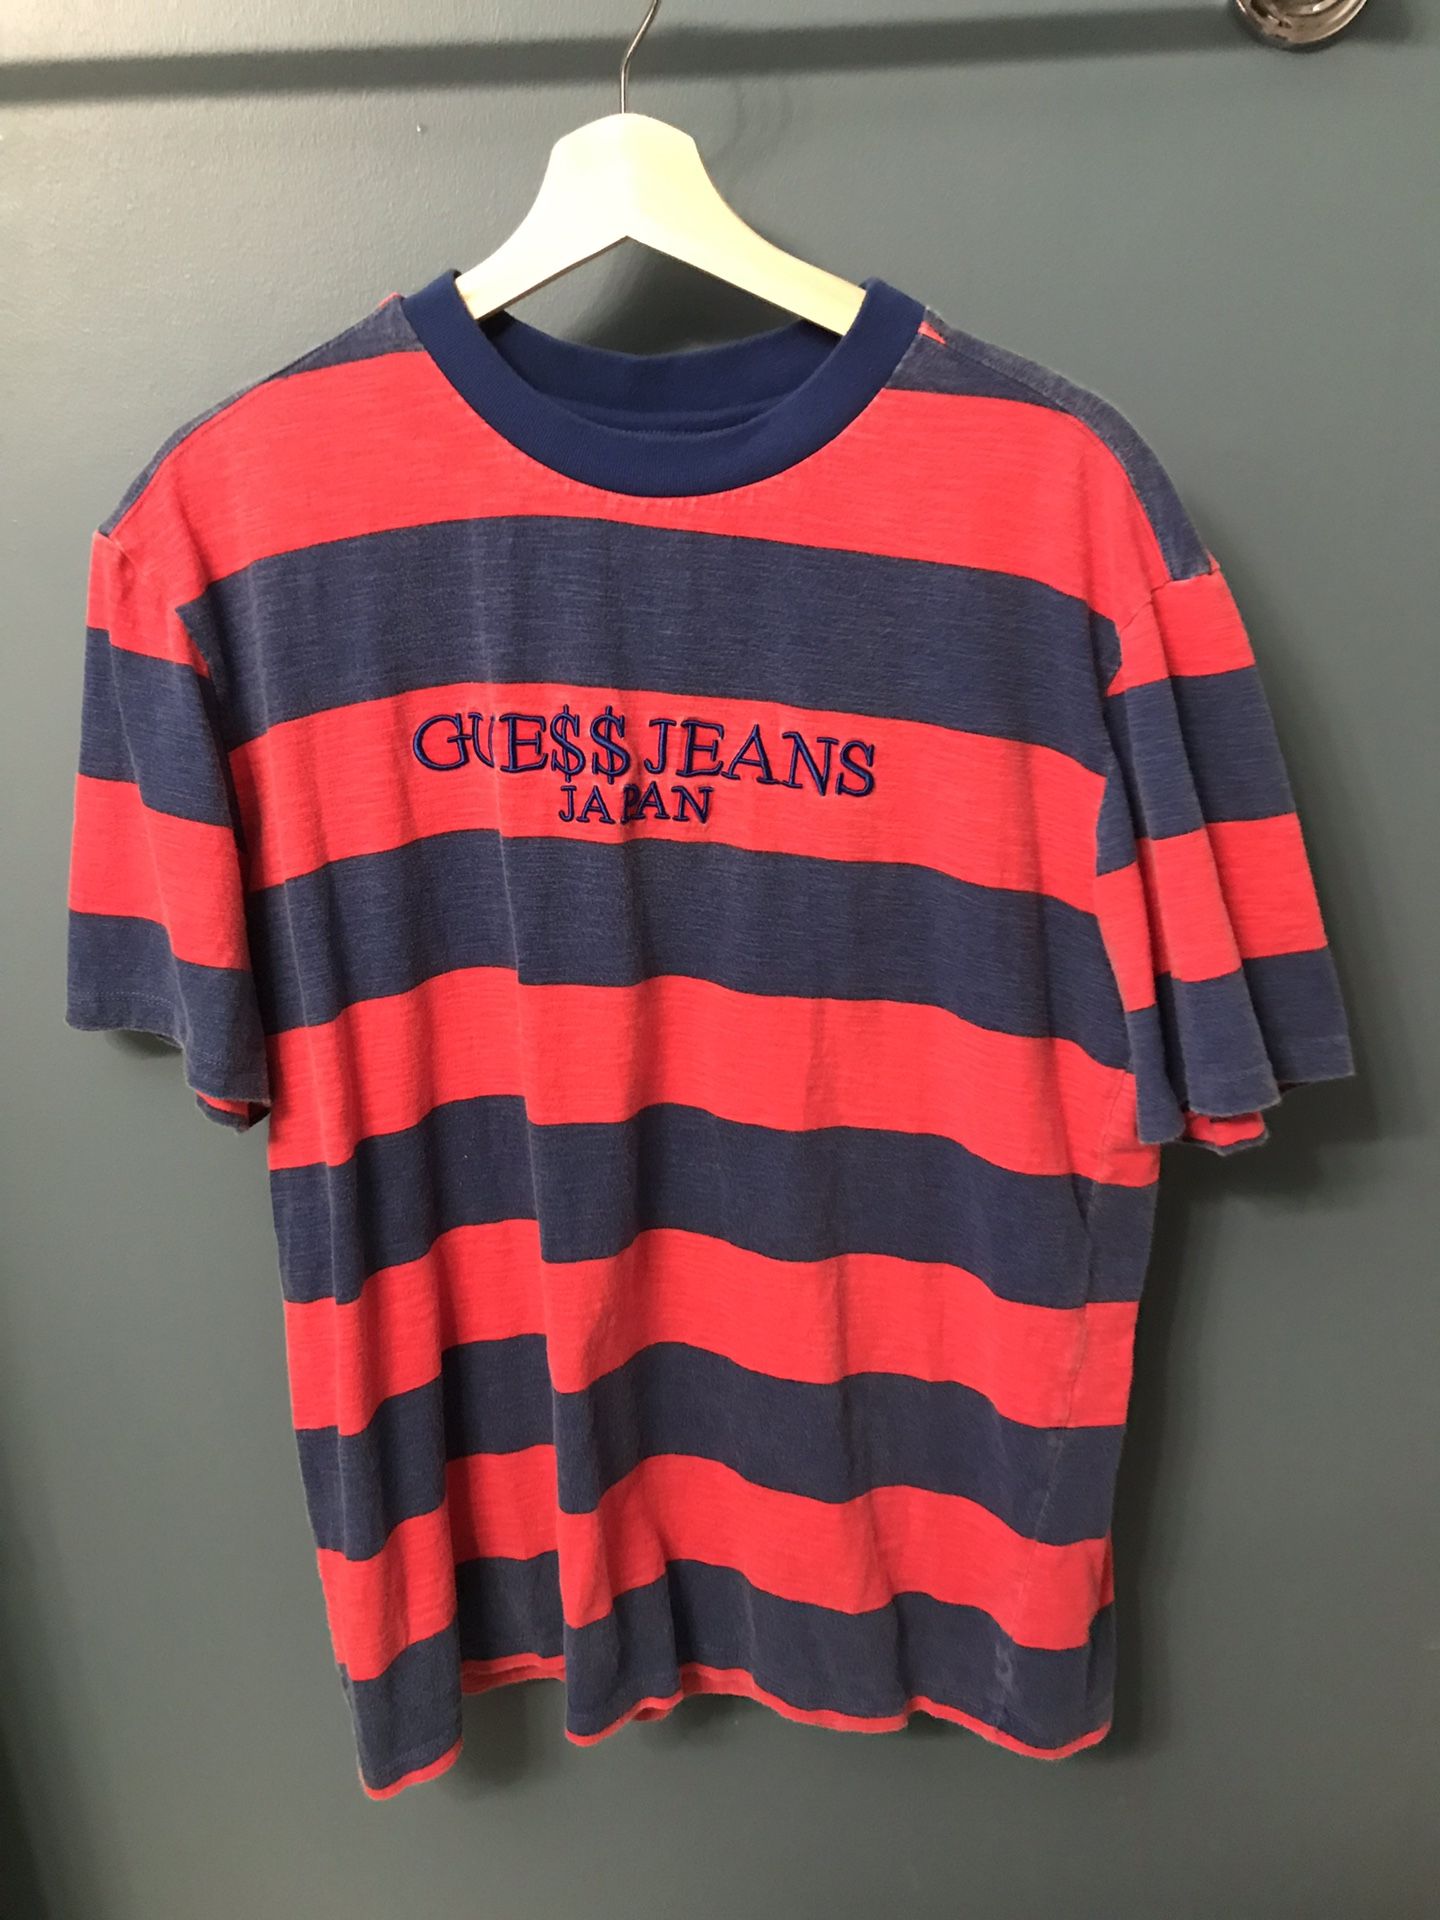 Guess Jeans x ASAP Rocky Japan Exclusive - Size Medium for Sale in Bloomingdale, IL - OfferUp